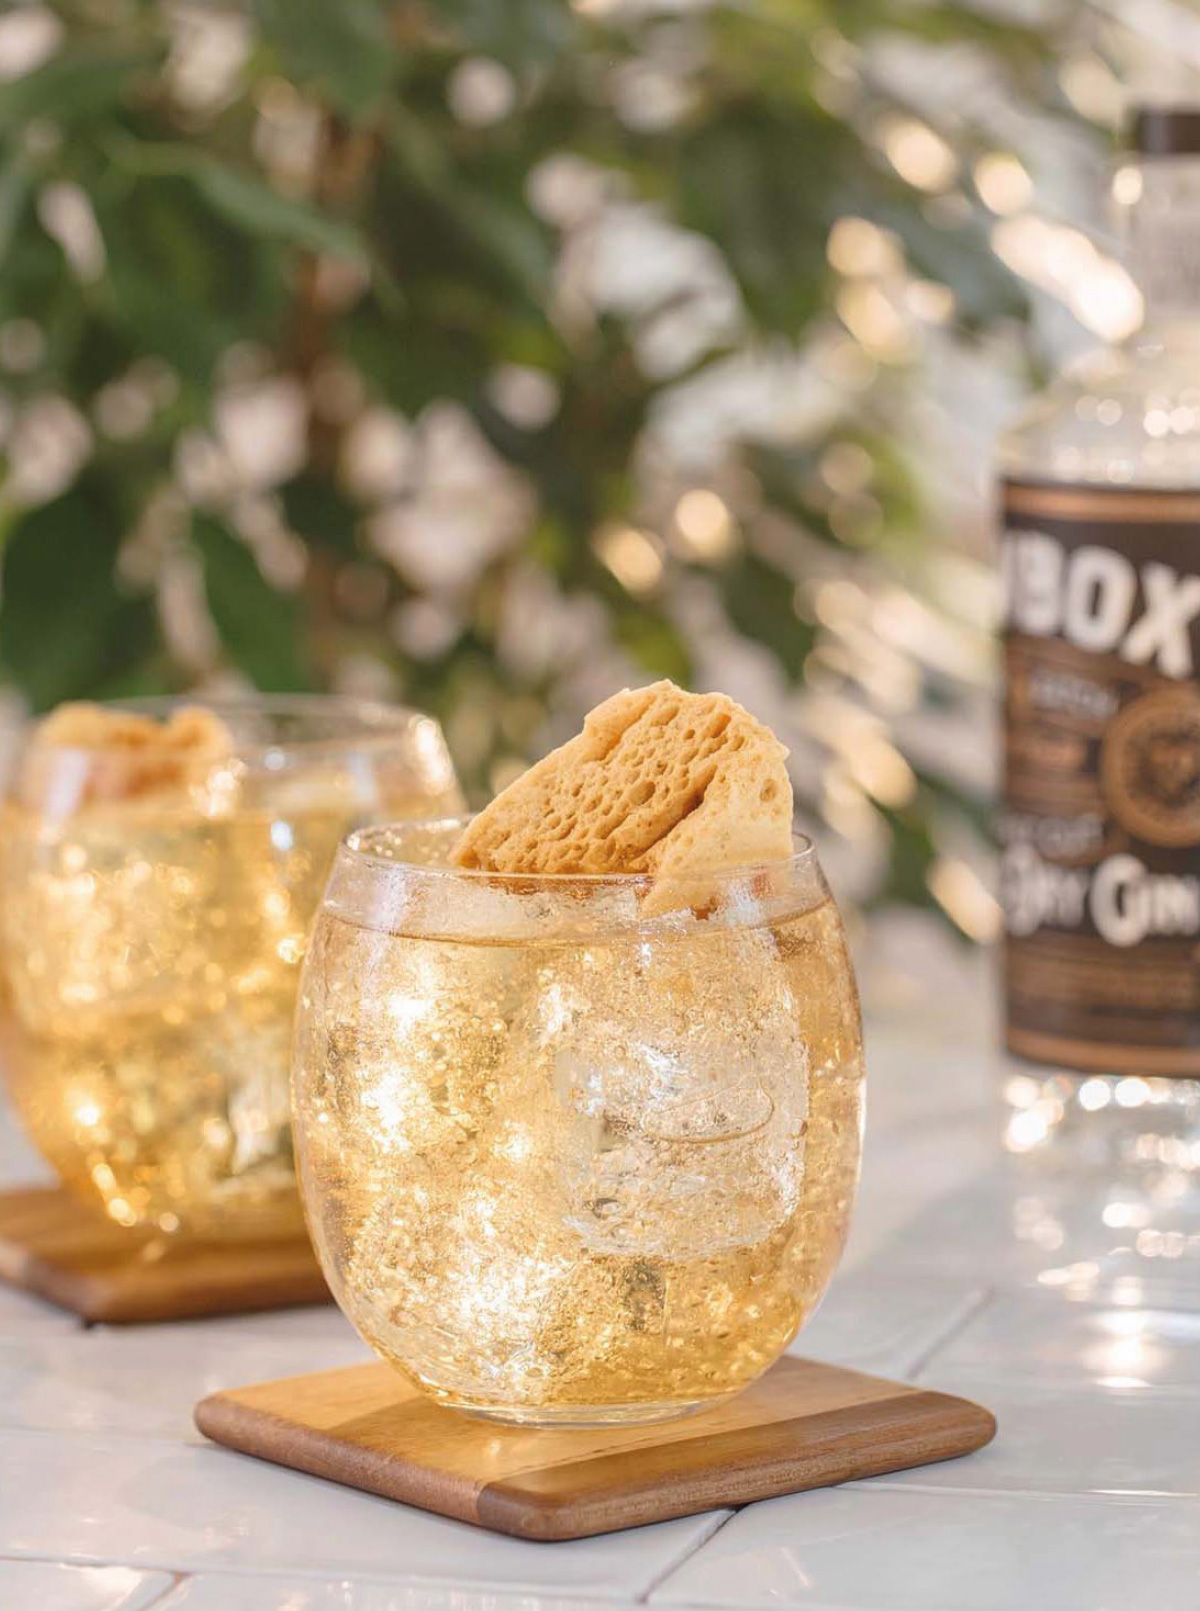 GIN & GINGER with Honeycomb